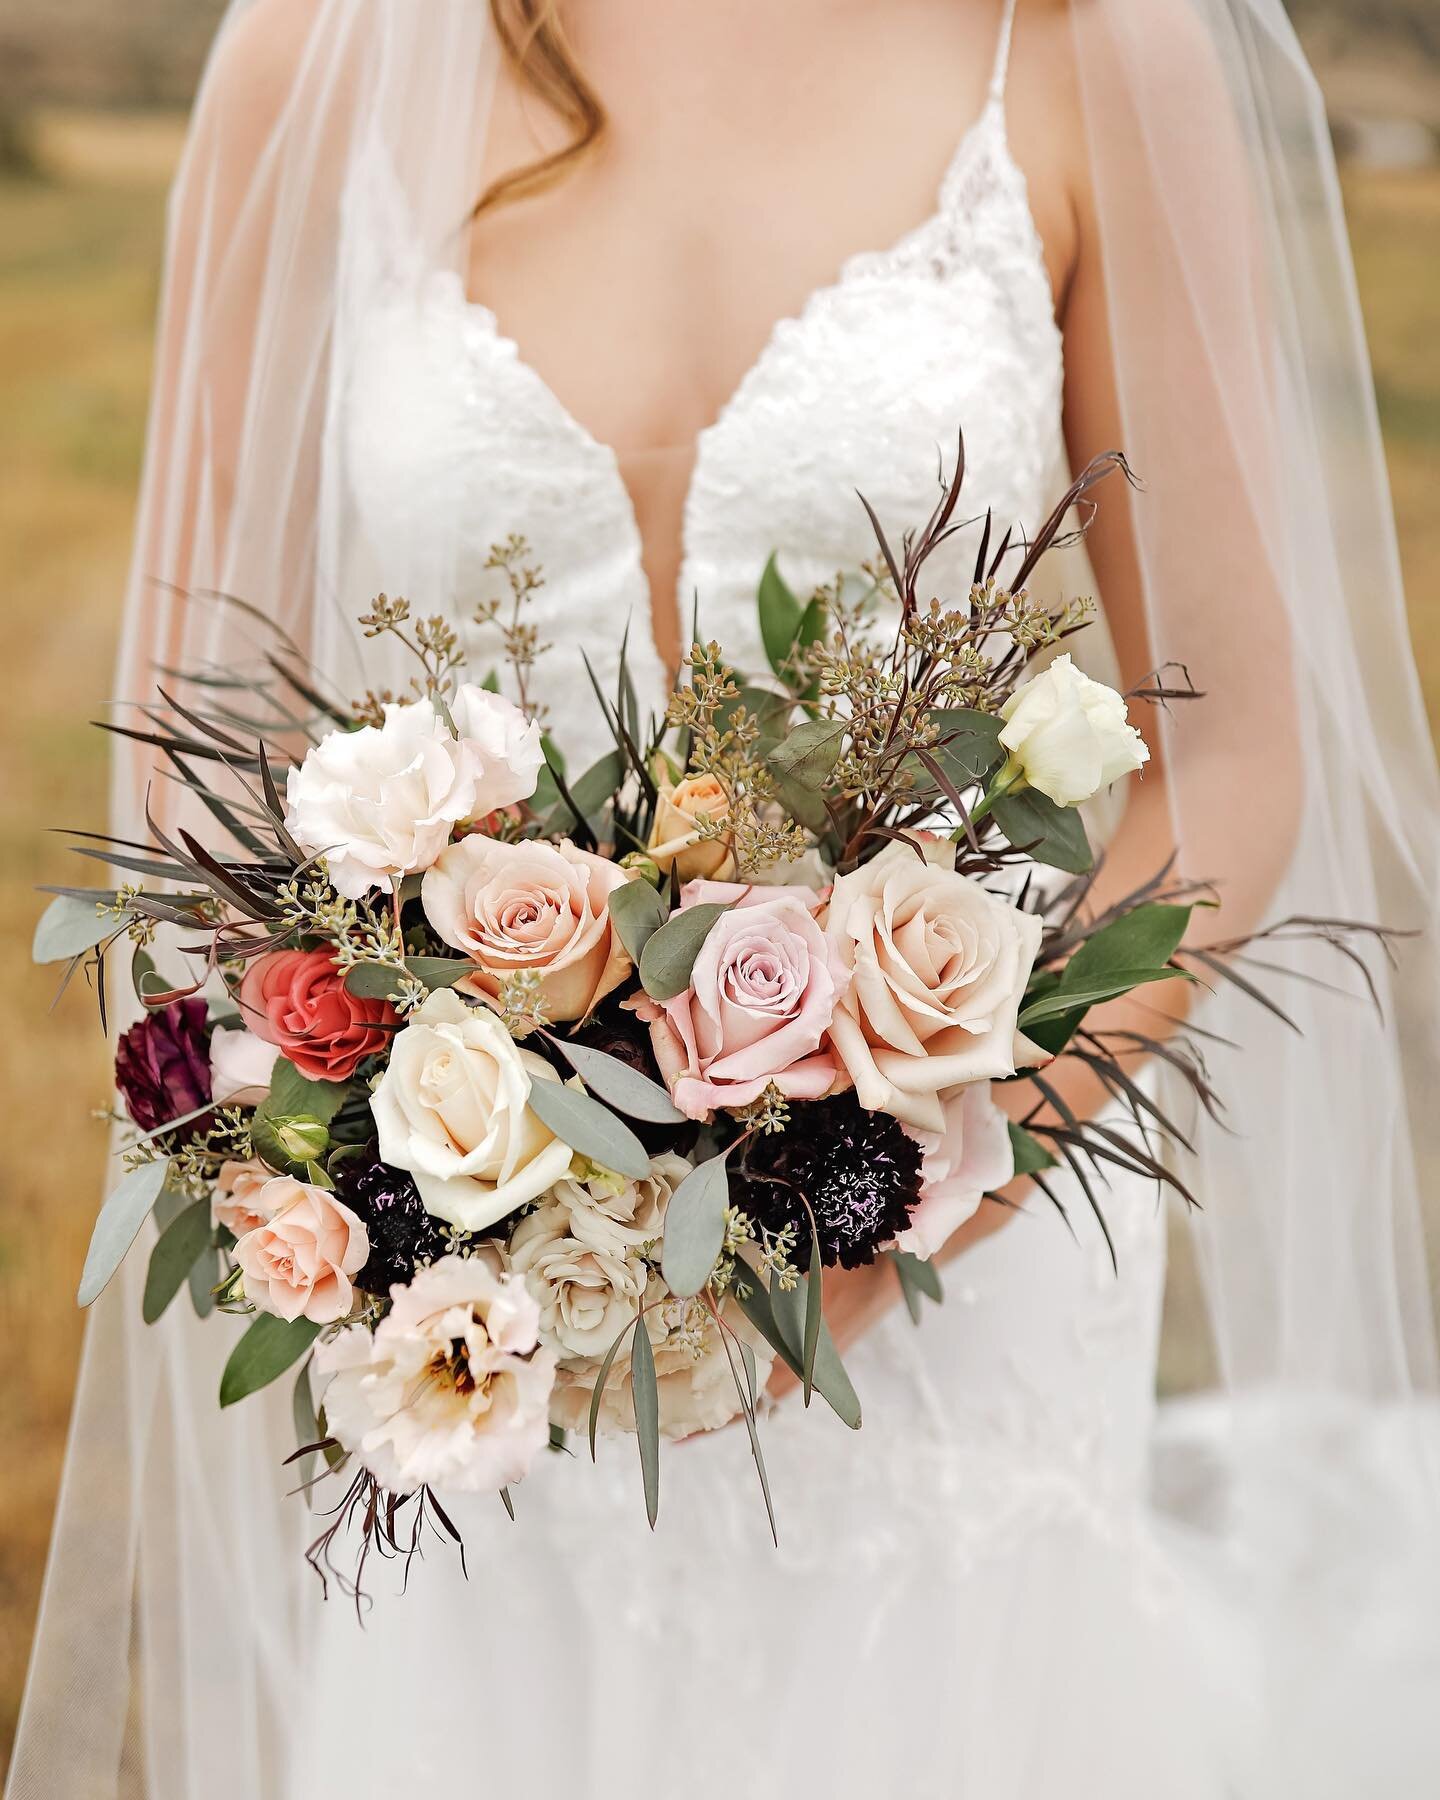 The color palette we choose was soft, romantic, and timeless. I loved all of the florals in this bouquet and this image captures each element so well.
Lovely Bride: @soph_mcclure
Photo Credit: @saranagelphotography

#localflowers #weddingflorist #wyo